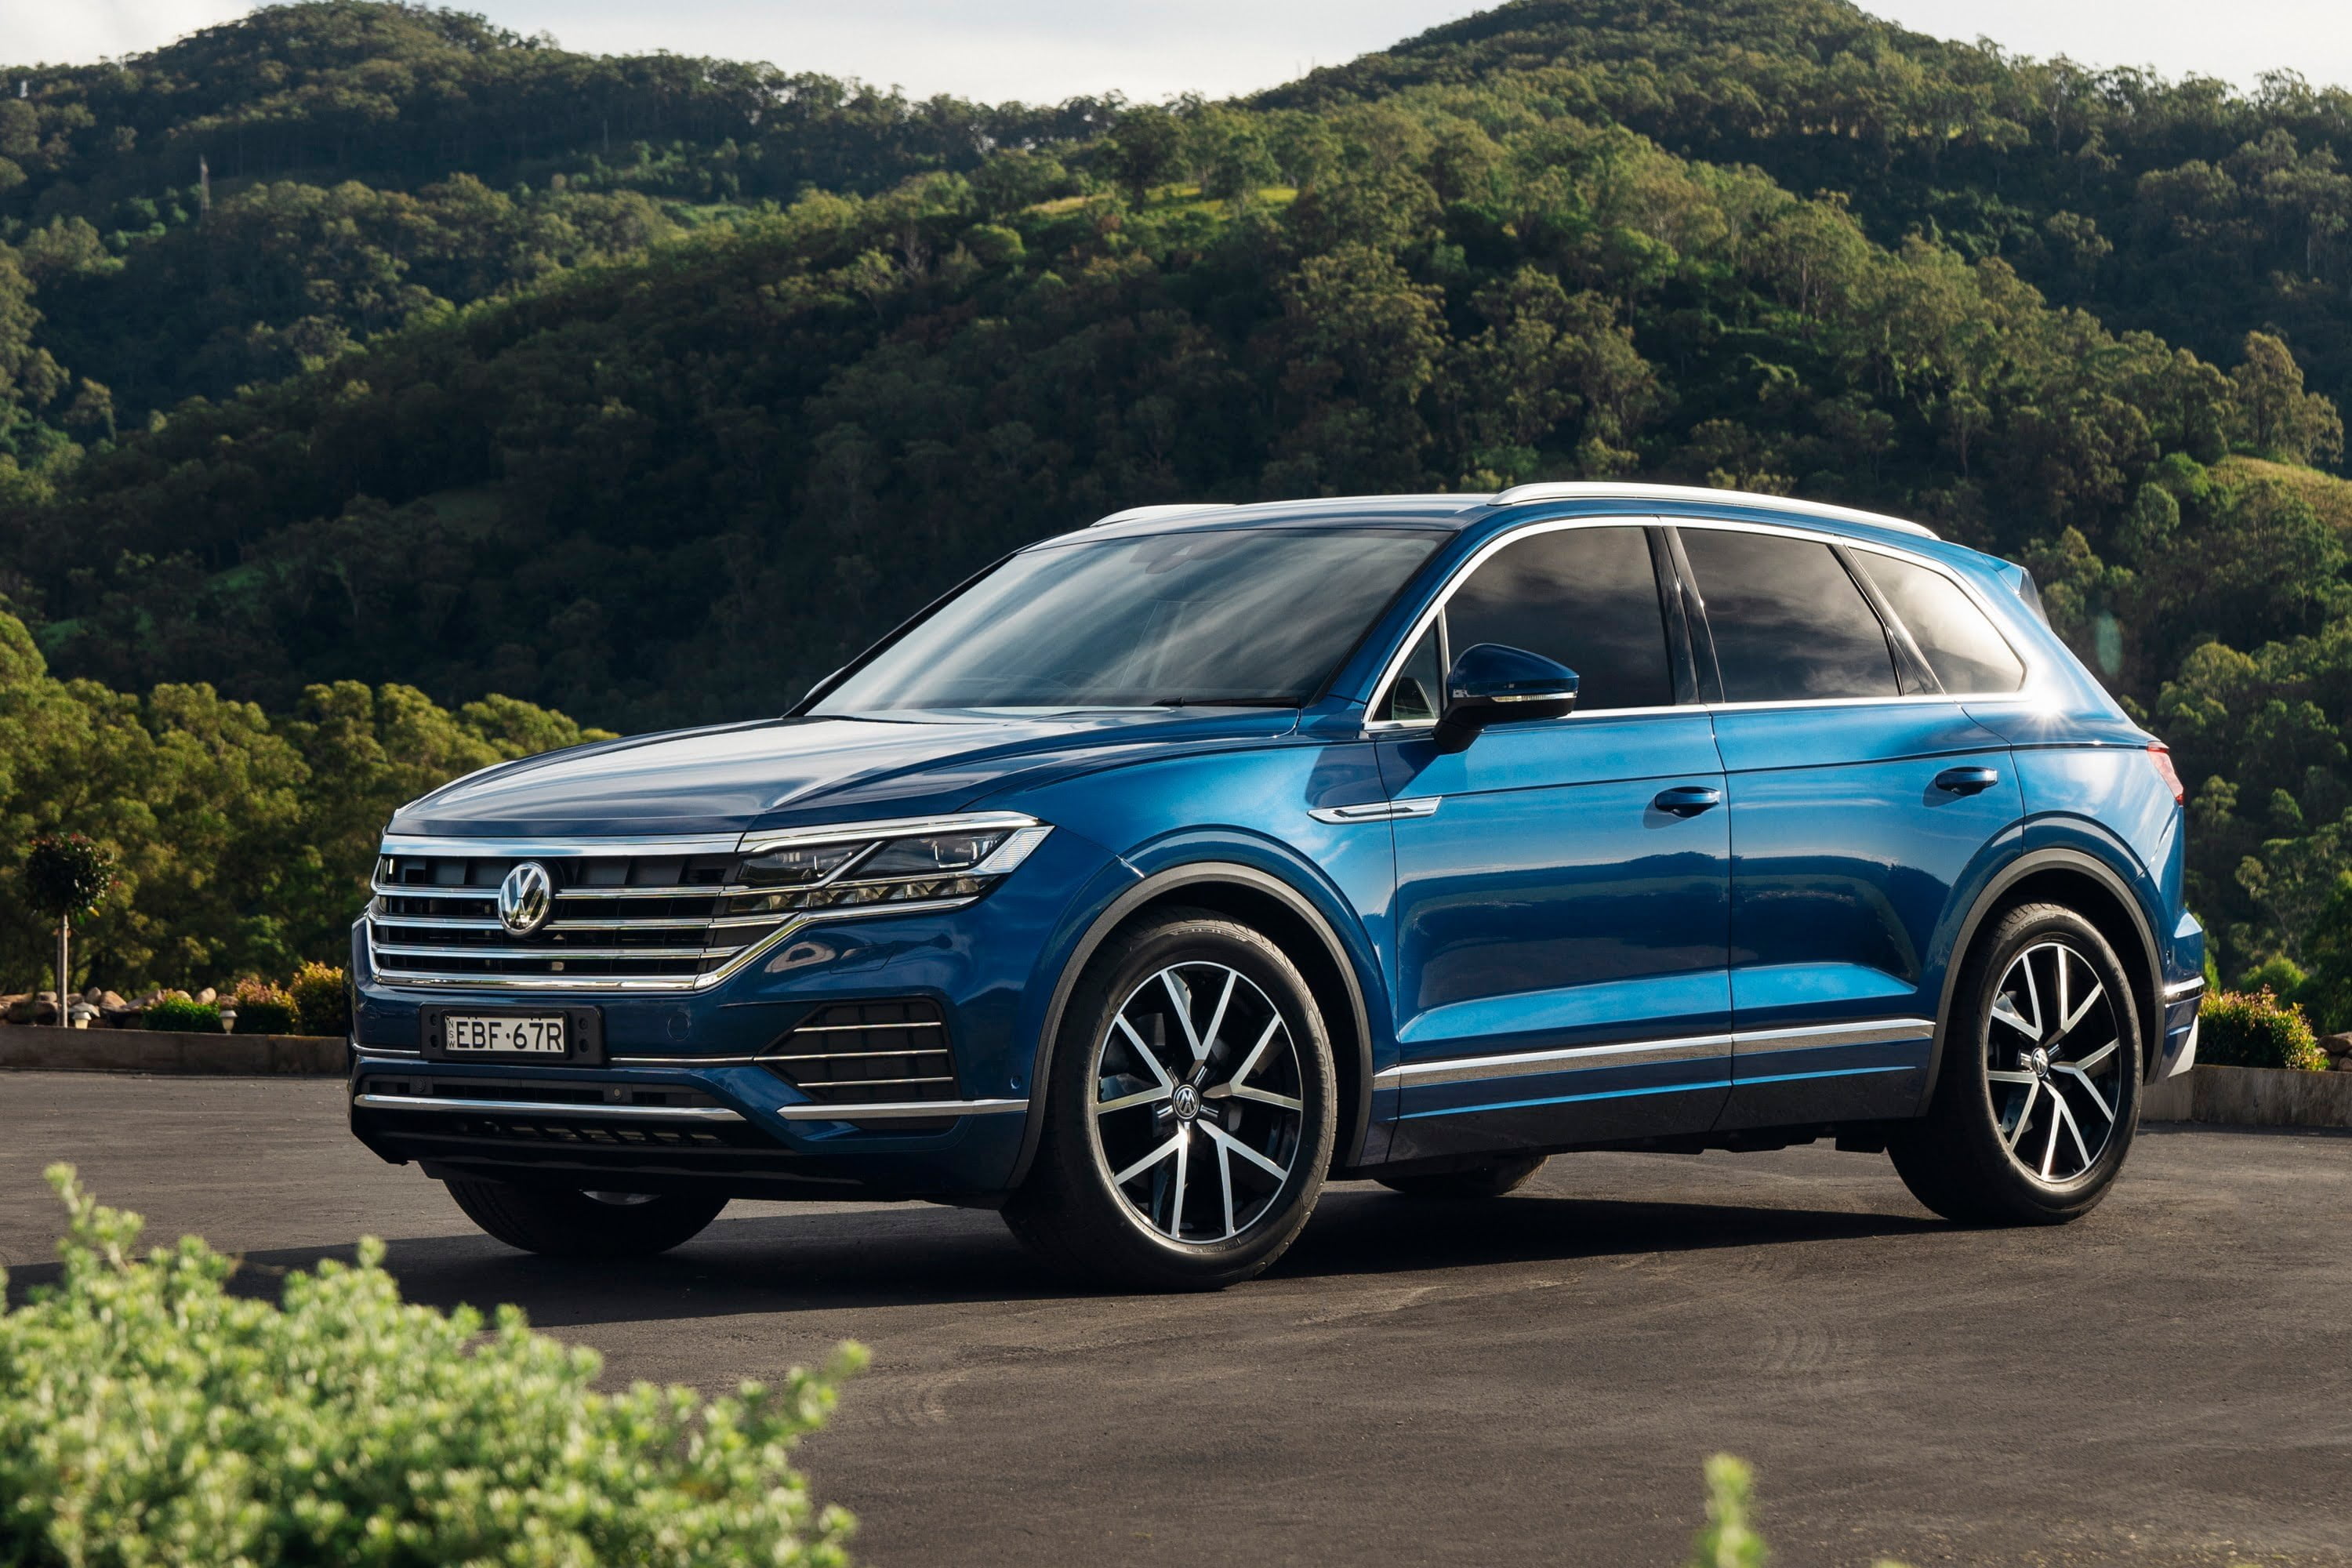 2019 VW Touareg Launch Edition 20 fit for purpose